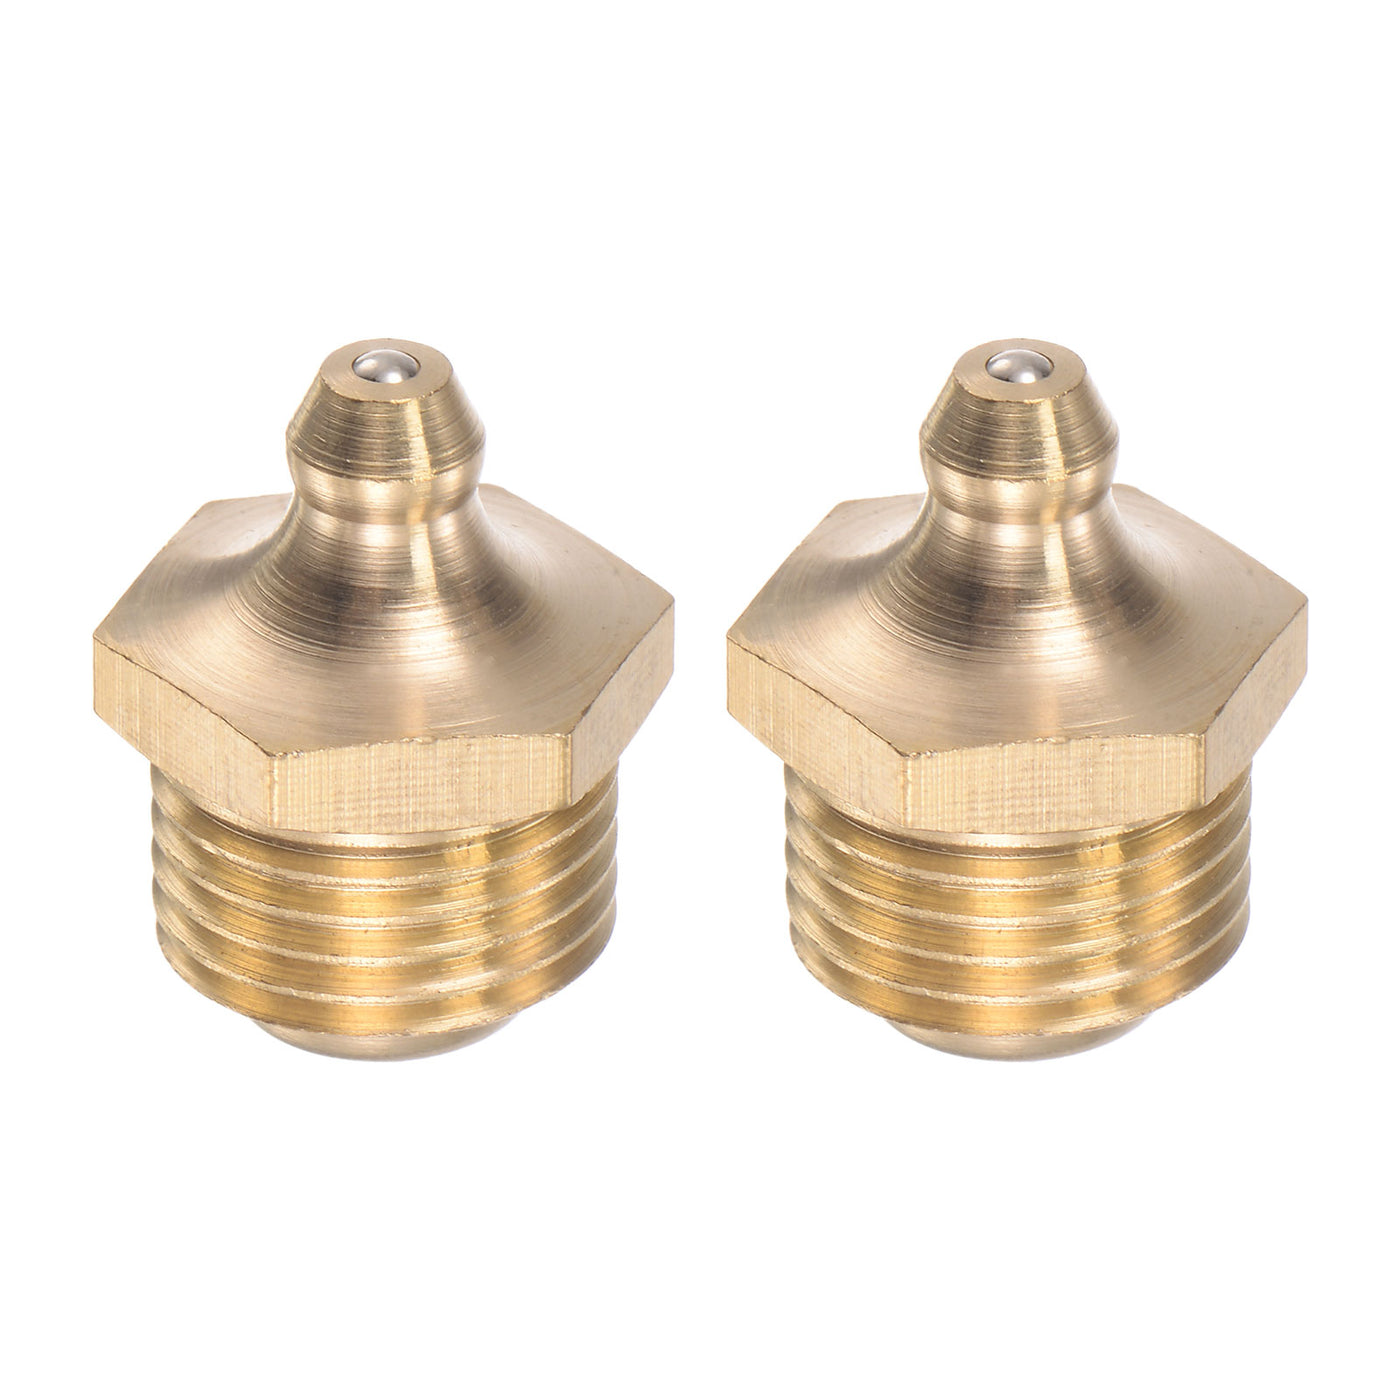 Uxcell Uxcell Brass Straight Hydraulic Grease Fitting Accessories M14 x 1.25mm Thread, 2Pcs